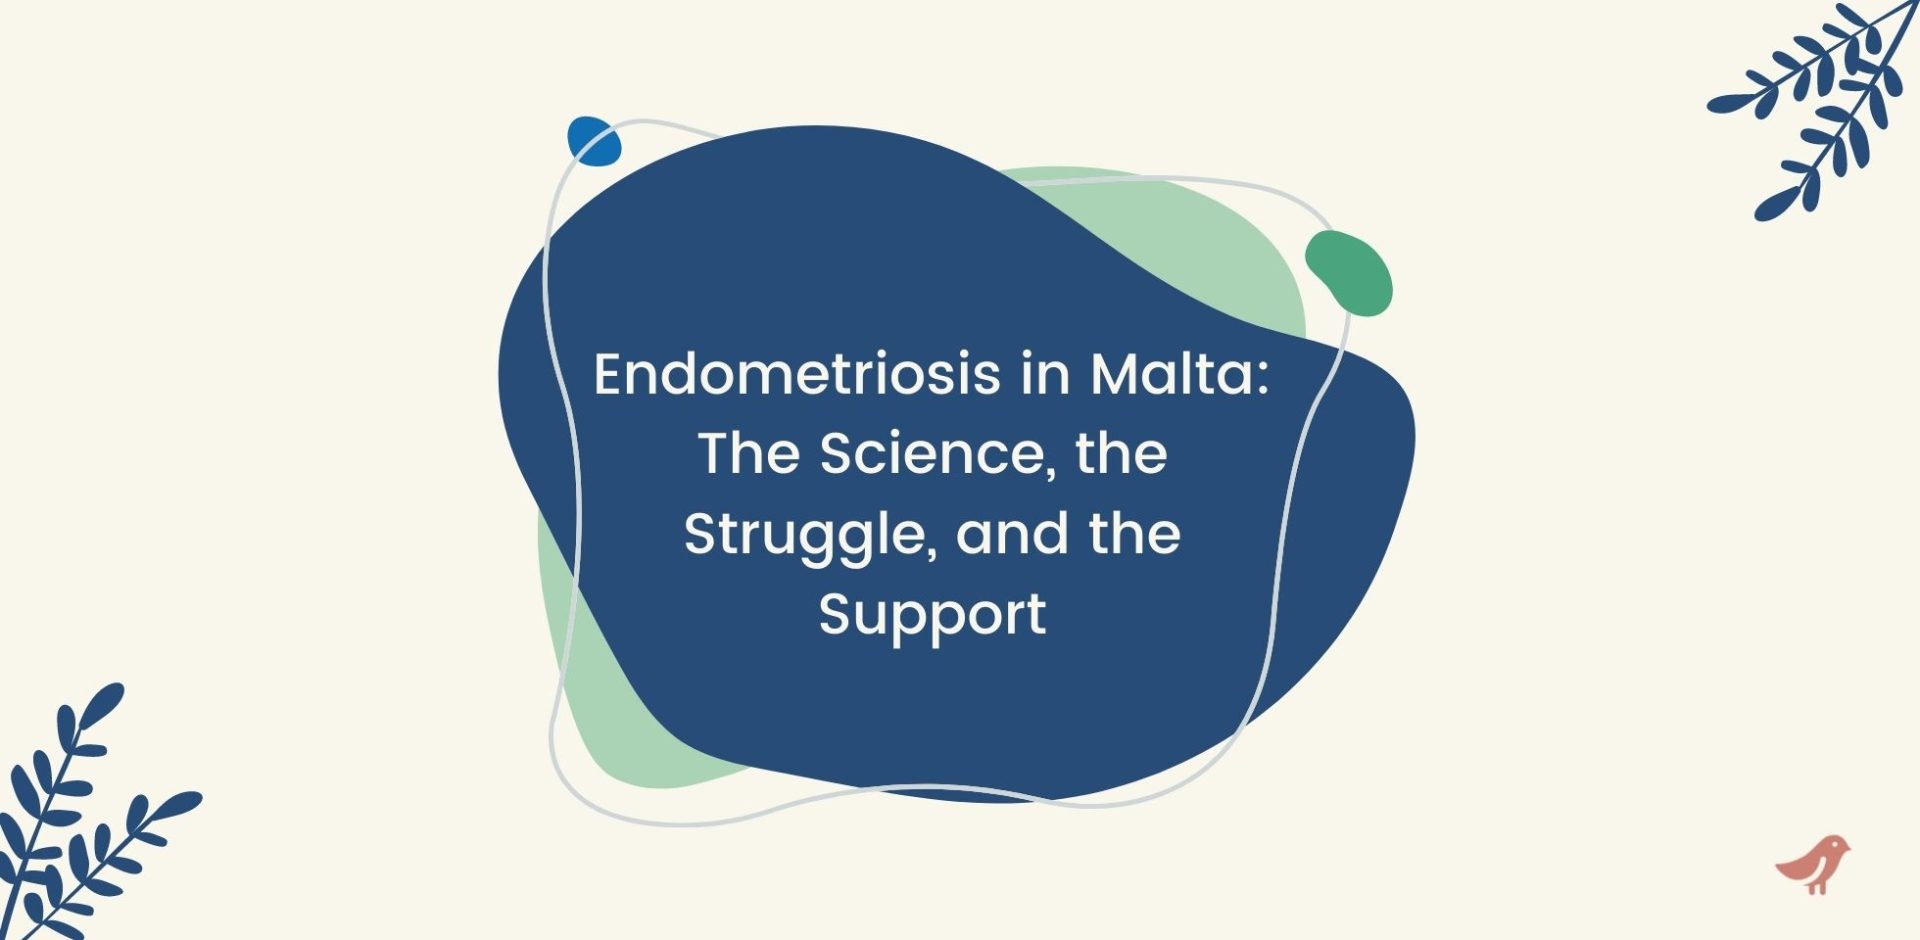 Endometriosis in Malta: The Science, the Struggle, and the Support.